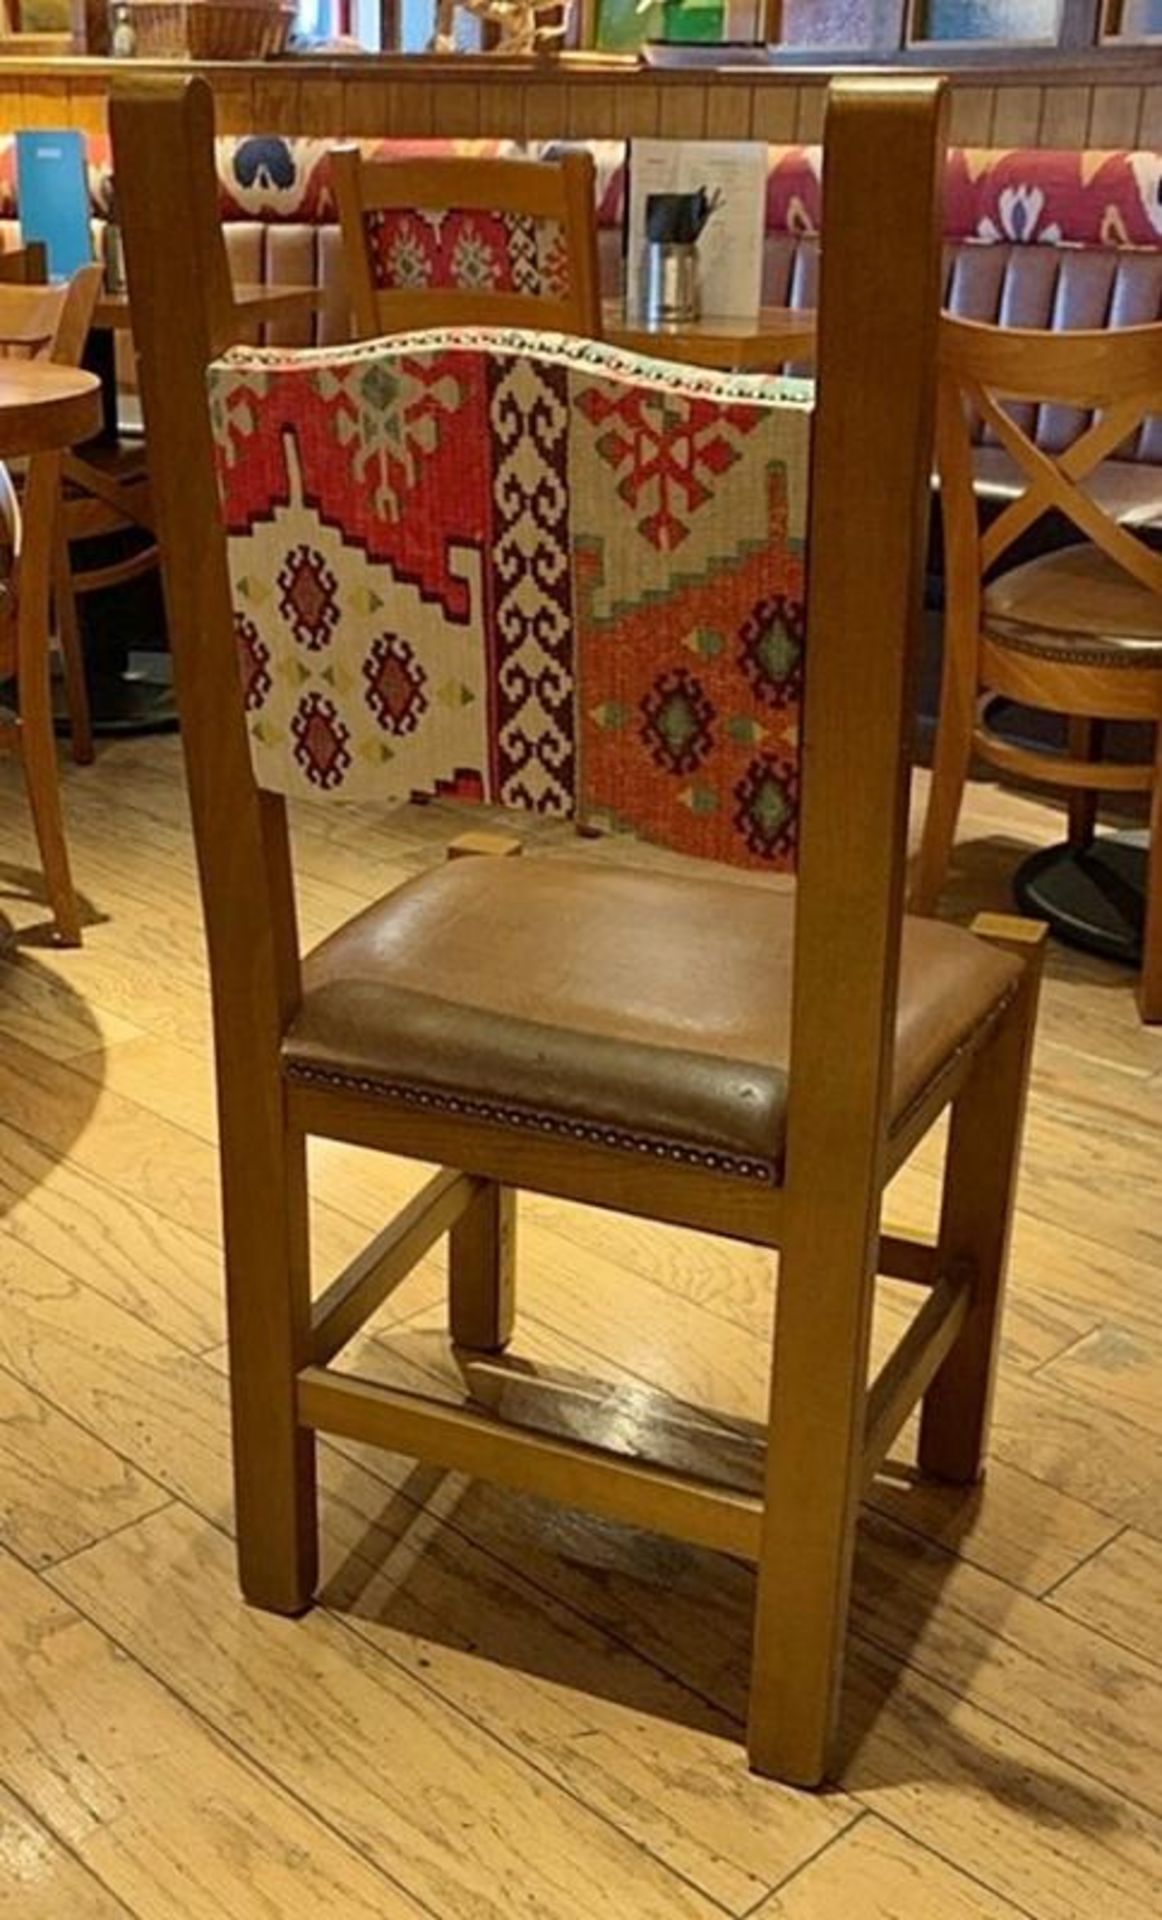 4 x Mid Height Upholstered Wooden Dining Chair - Dimensions: H100cm W46cm - CL339 - From a Popular M - Image 3 of 3